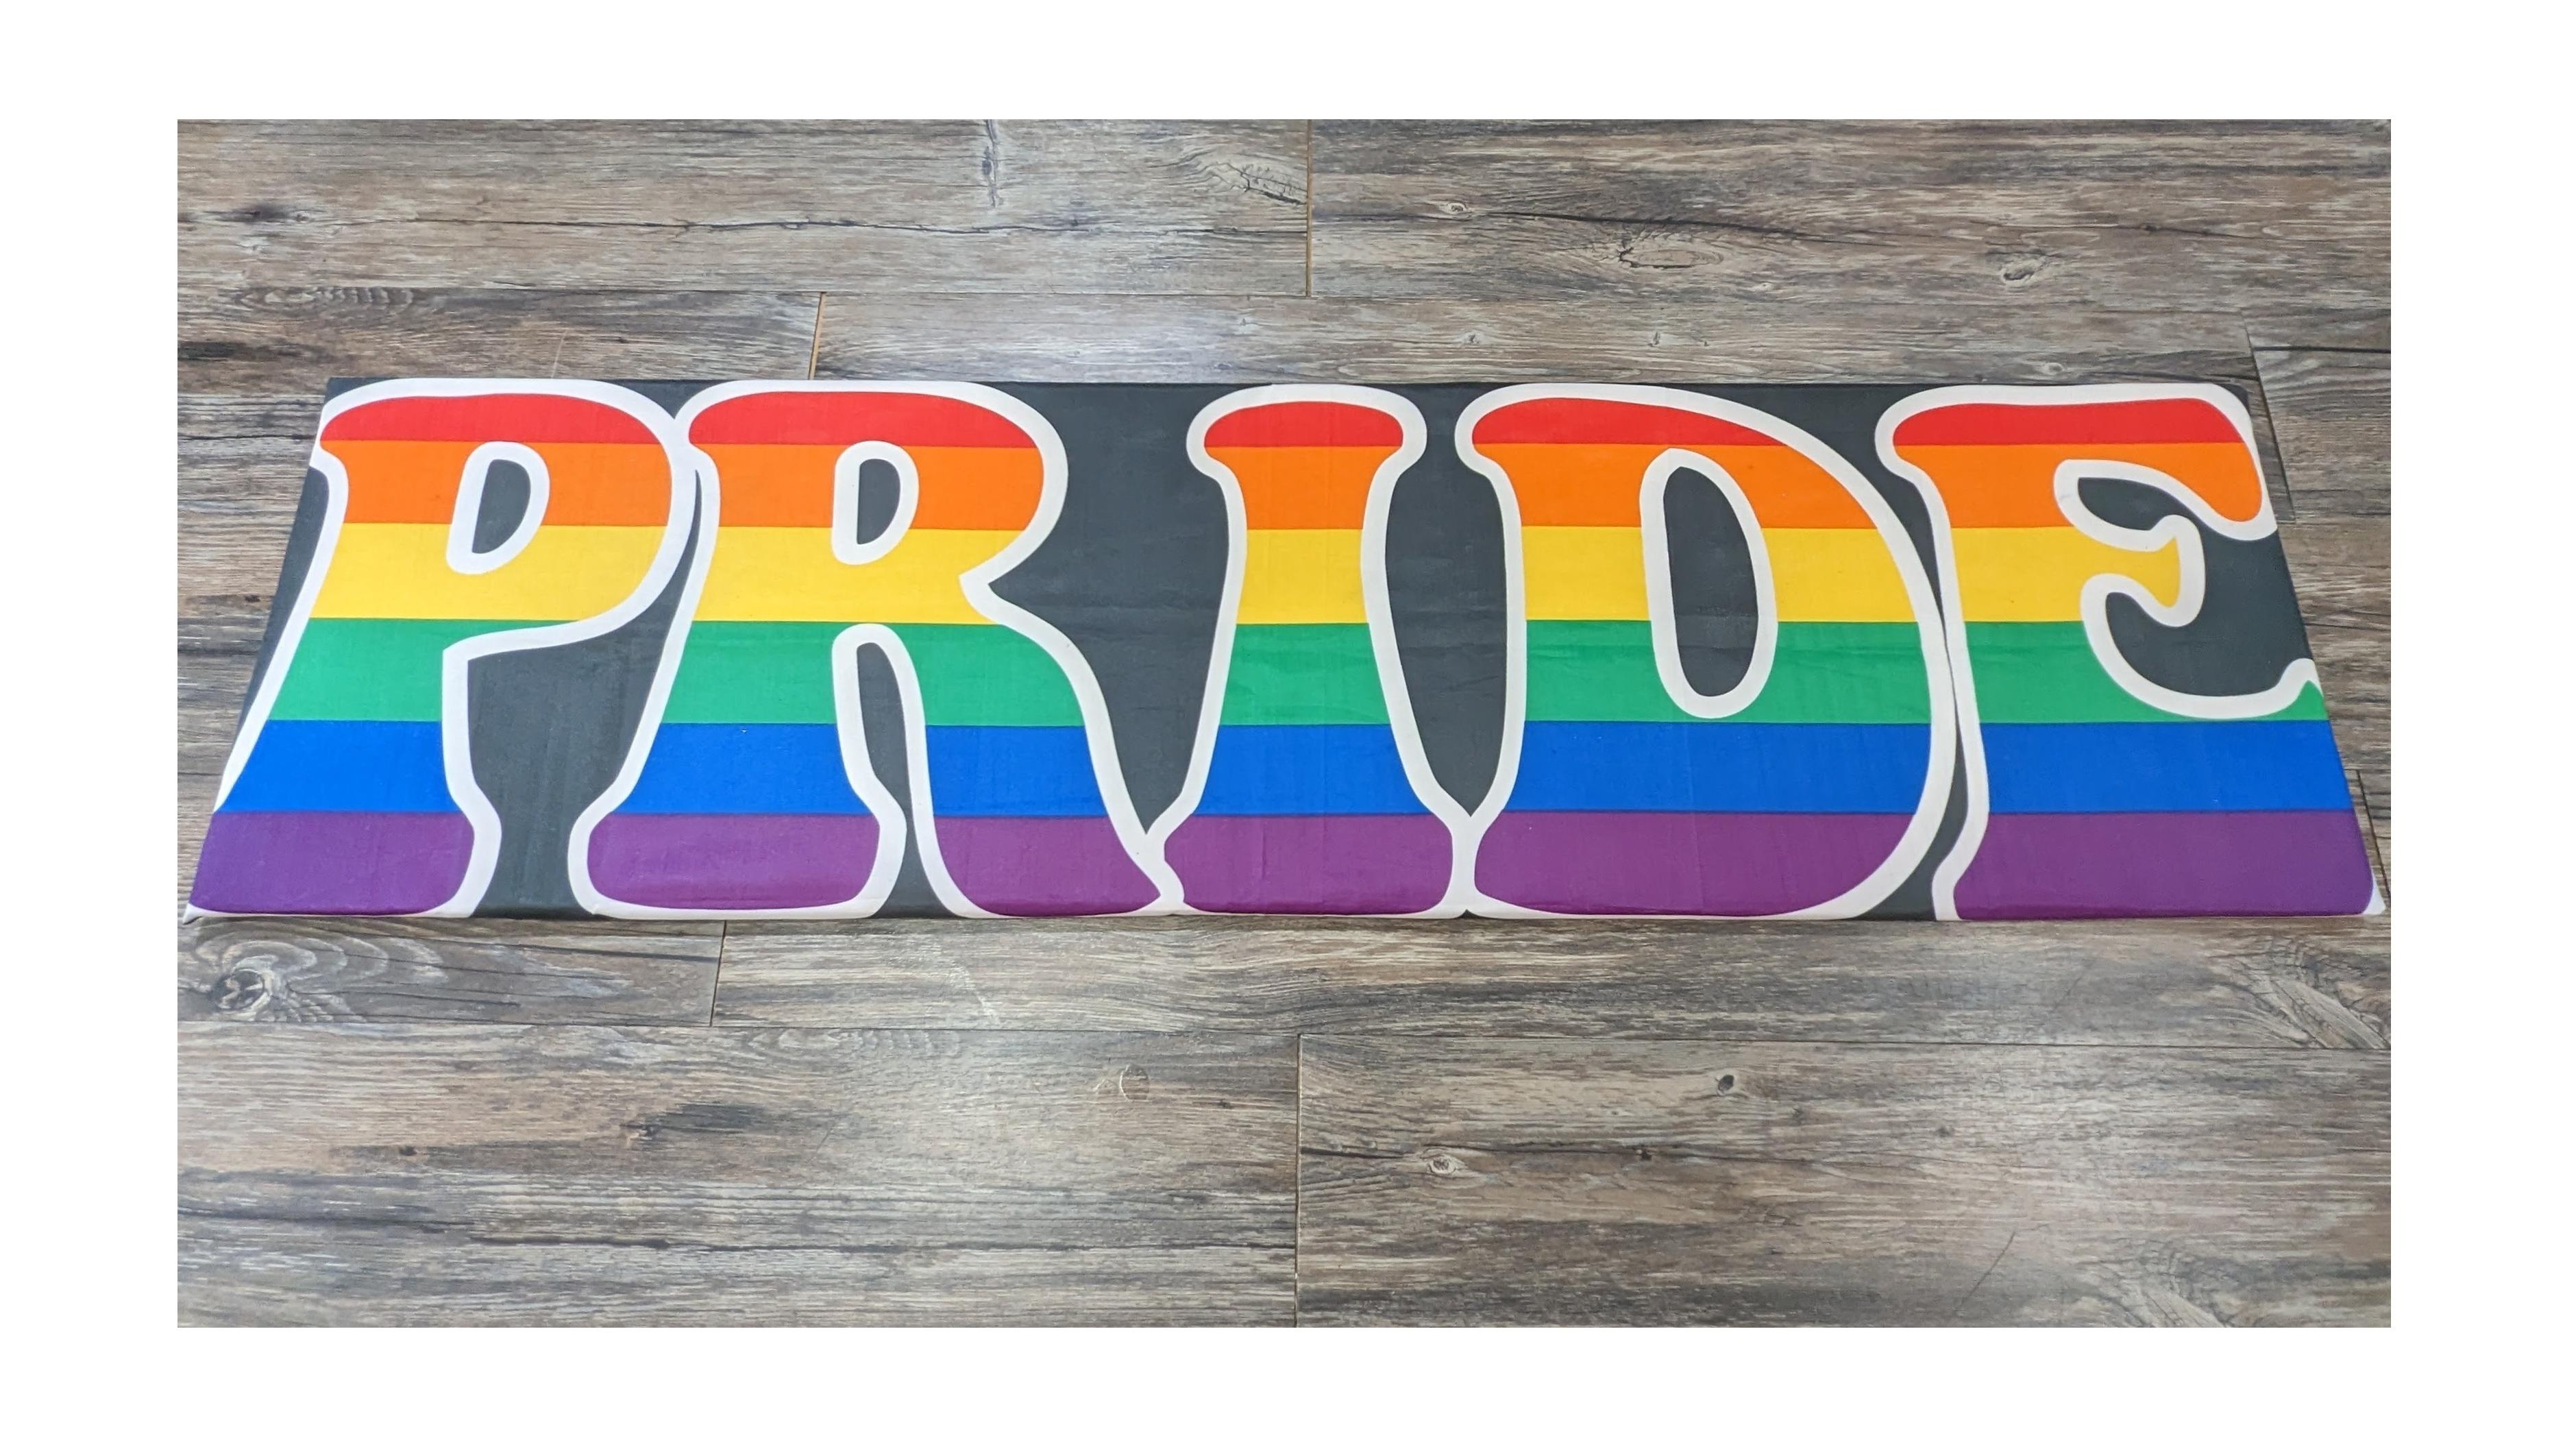 The Word "Pride" with a rainbow overlay.